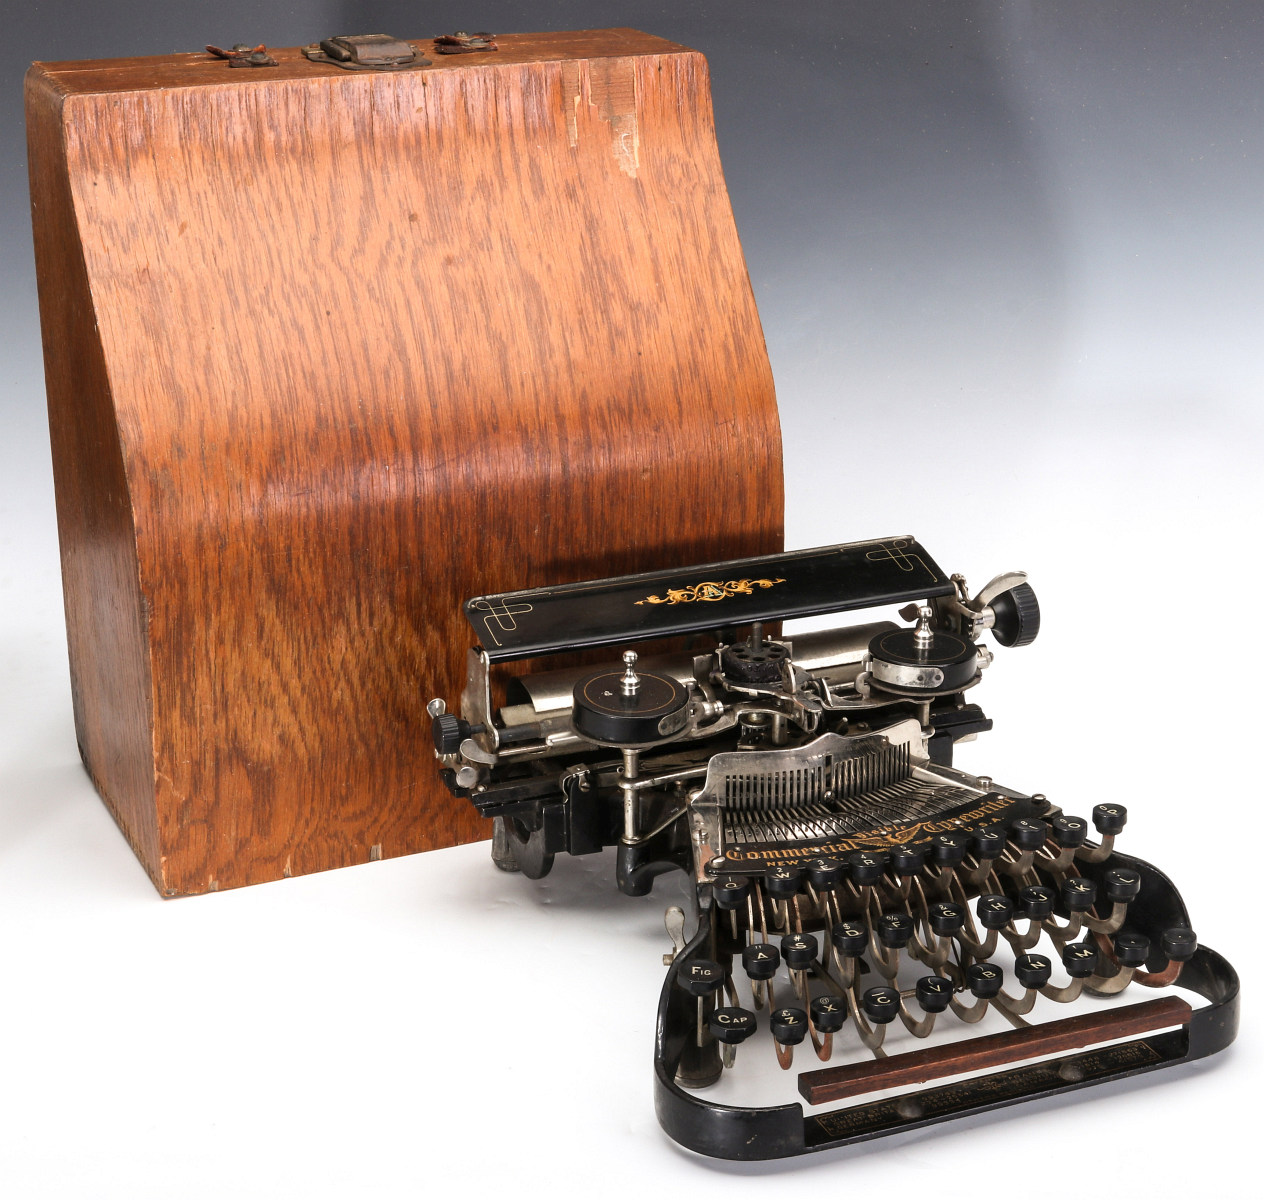 A RARE COMMERCIAL VISIBLE TYPEWRITER MODEL A, 1903